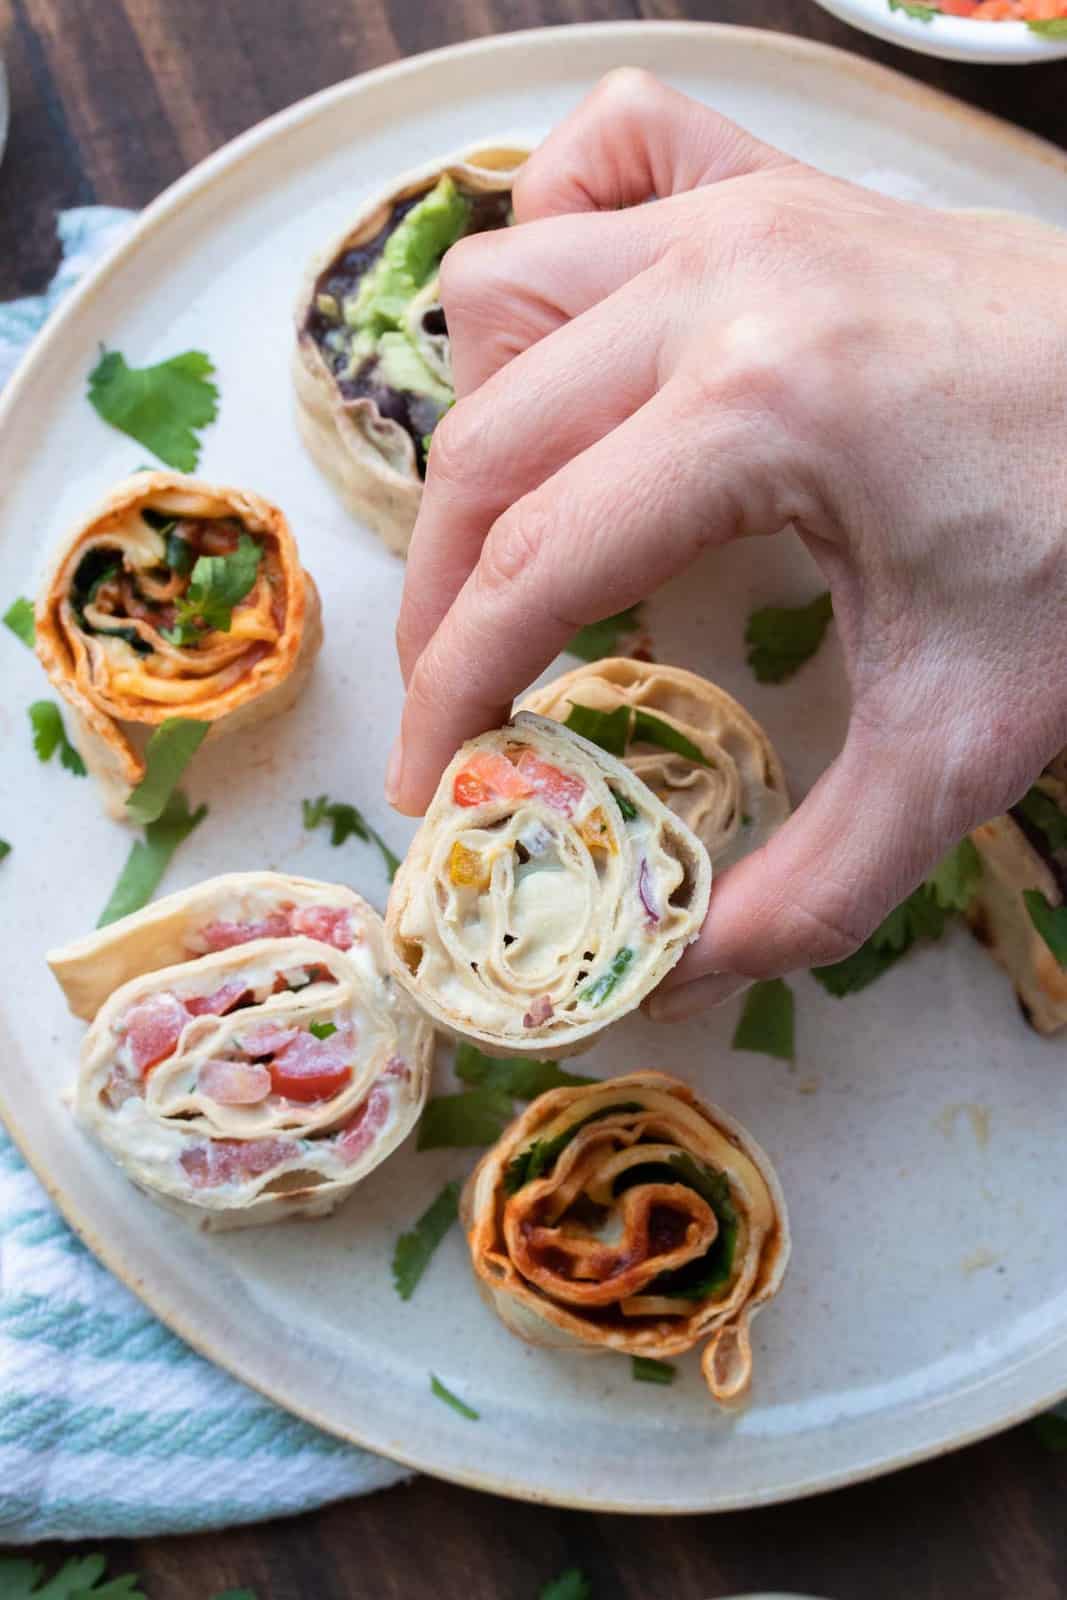 Hand grabbing a pinwheel sandwich filled with veggies and cream cheese